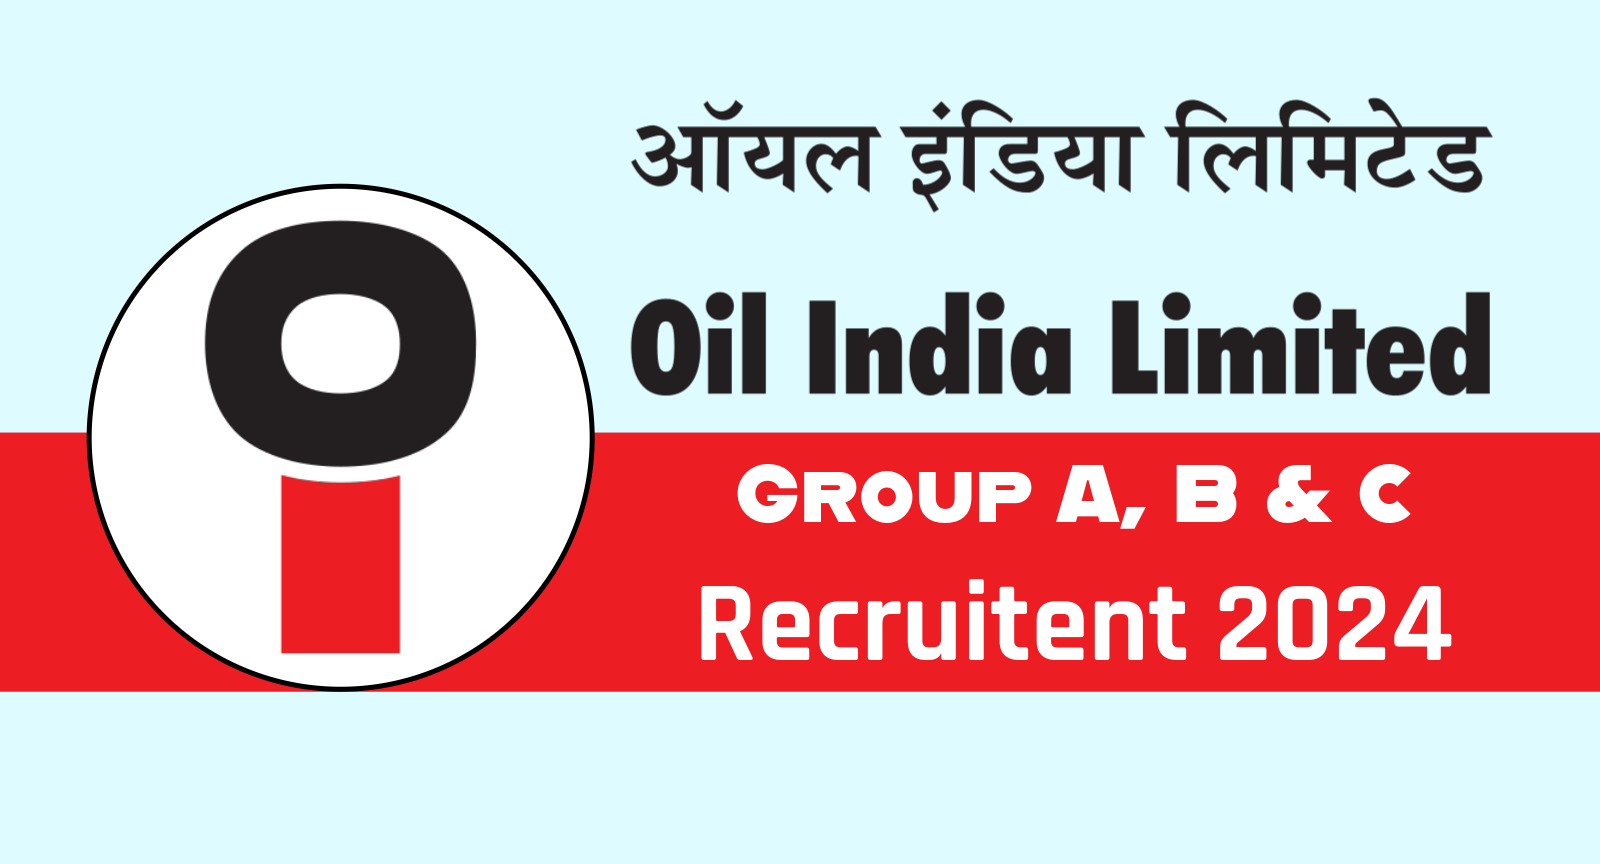 Oil India Limited Workperson Recruitment 2023 - Apply Now For Various Job  Opportunities